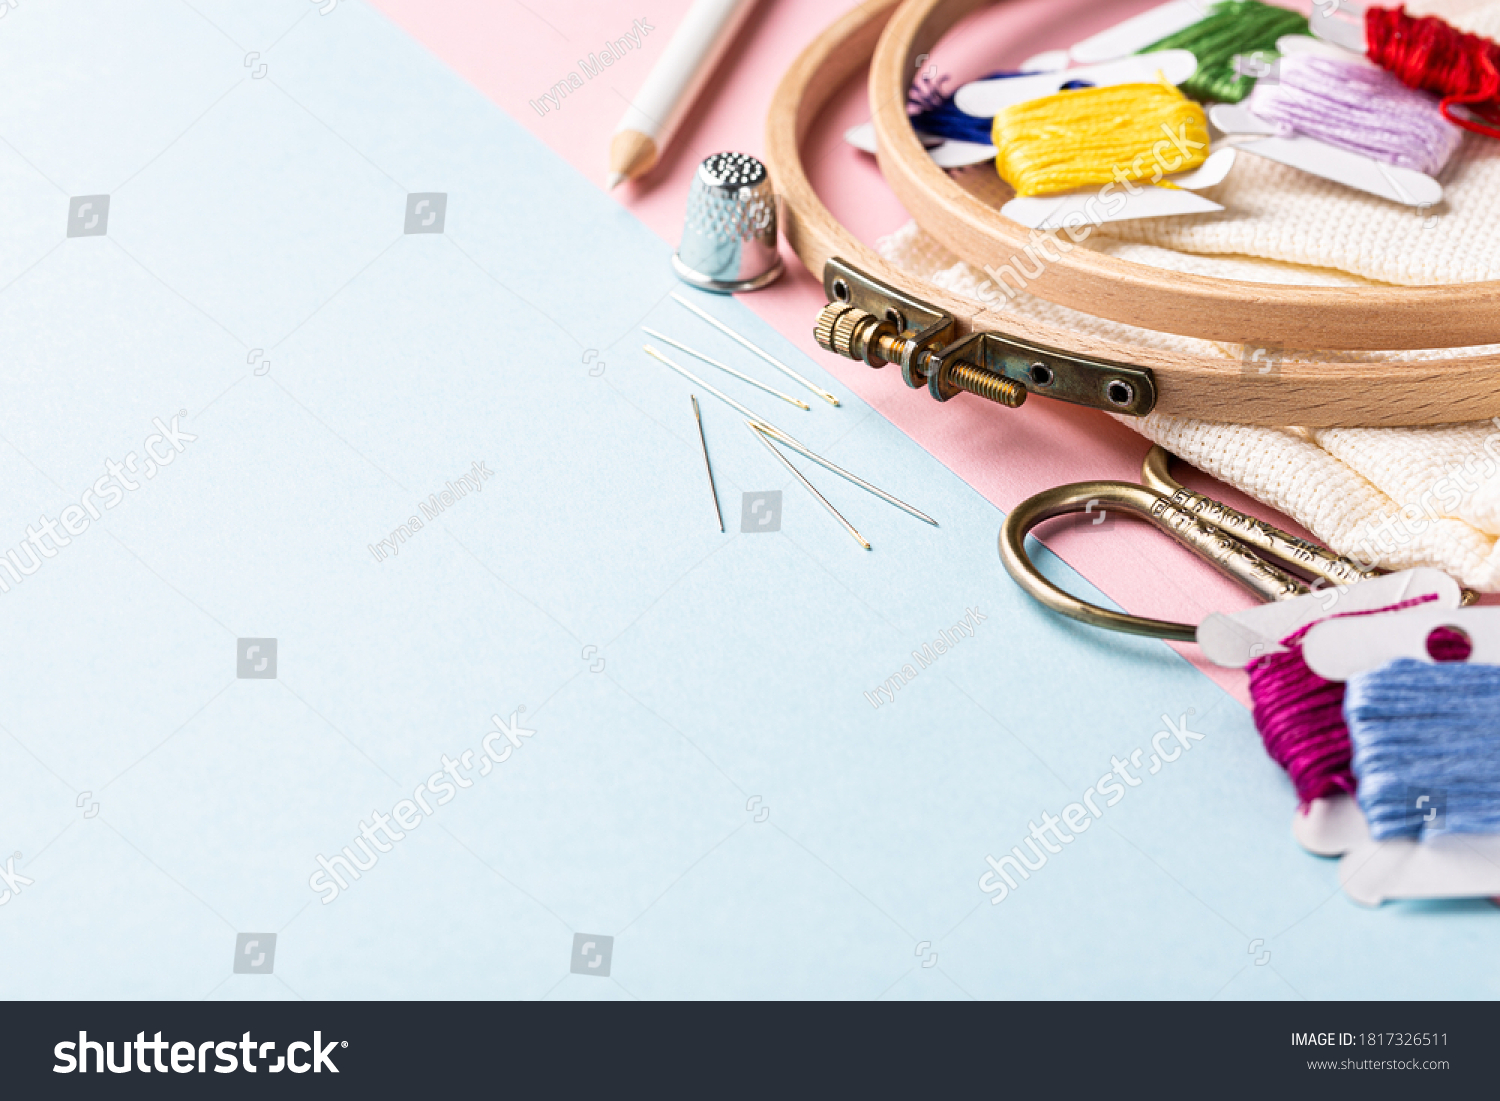 Embroidery set fot cross stitching. White fabric, embroidery hoop, colorful threads, scissors and needls. On blue background. Hobbies concept with copy space. #1817326511